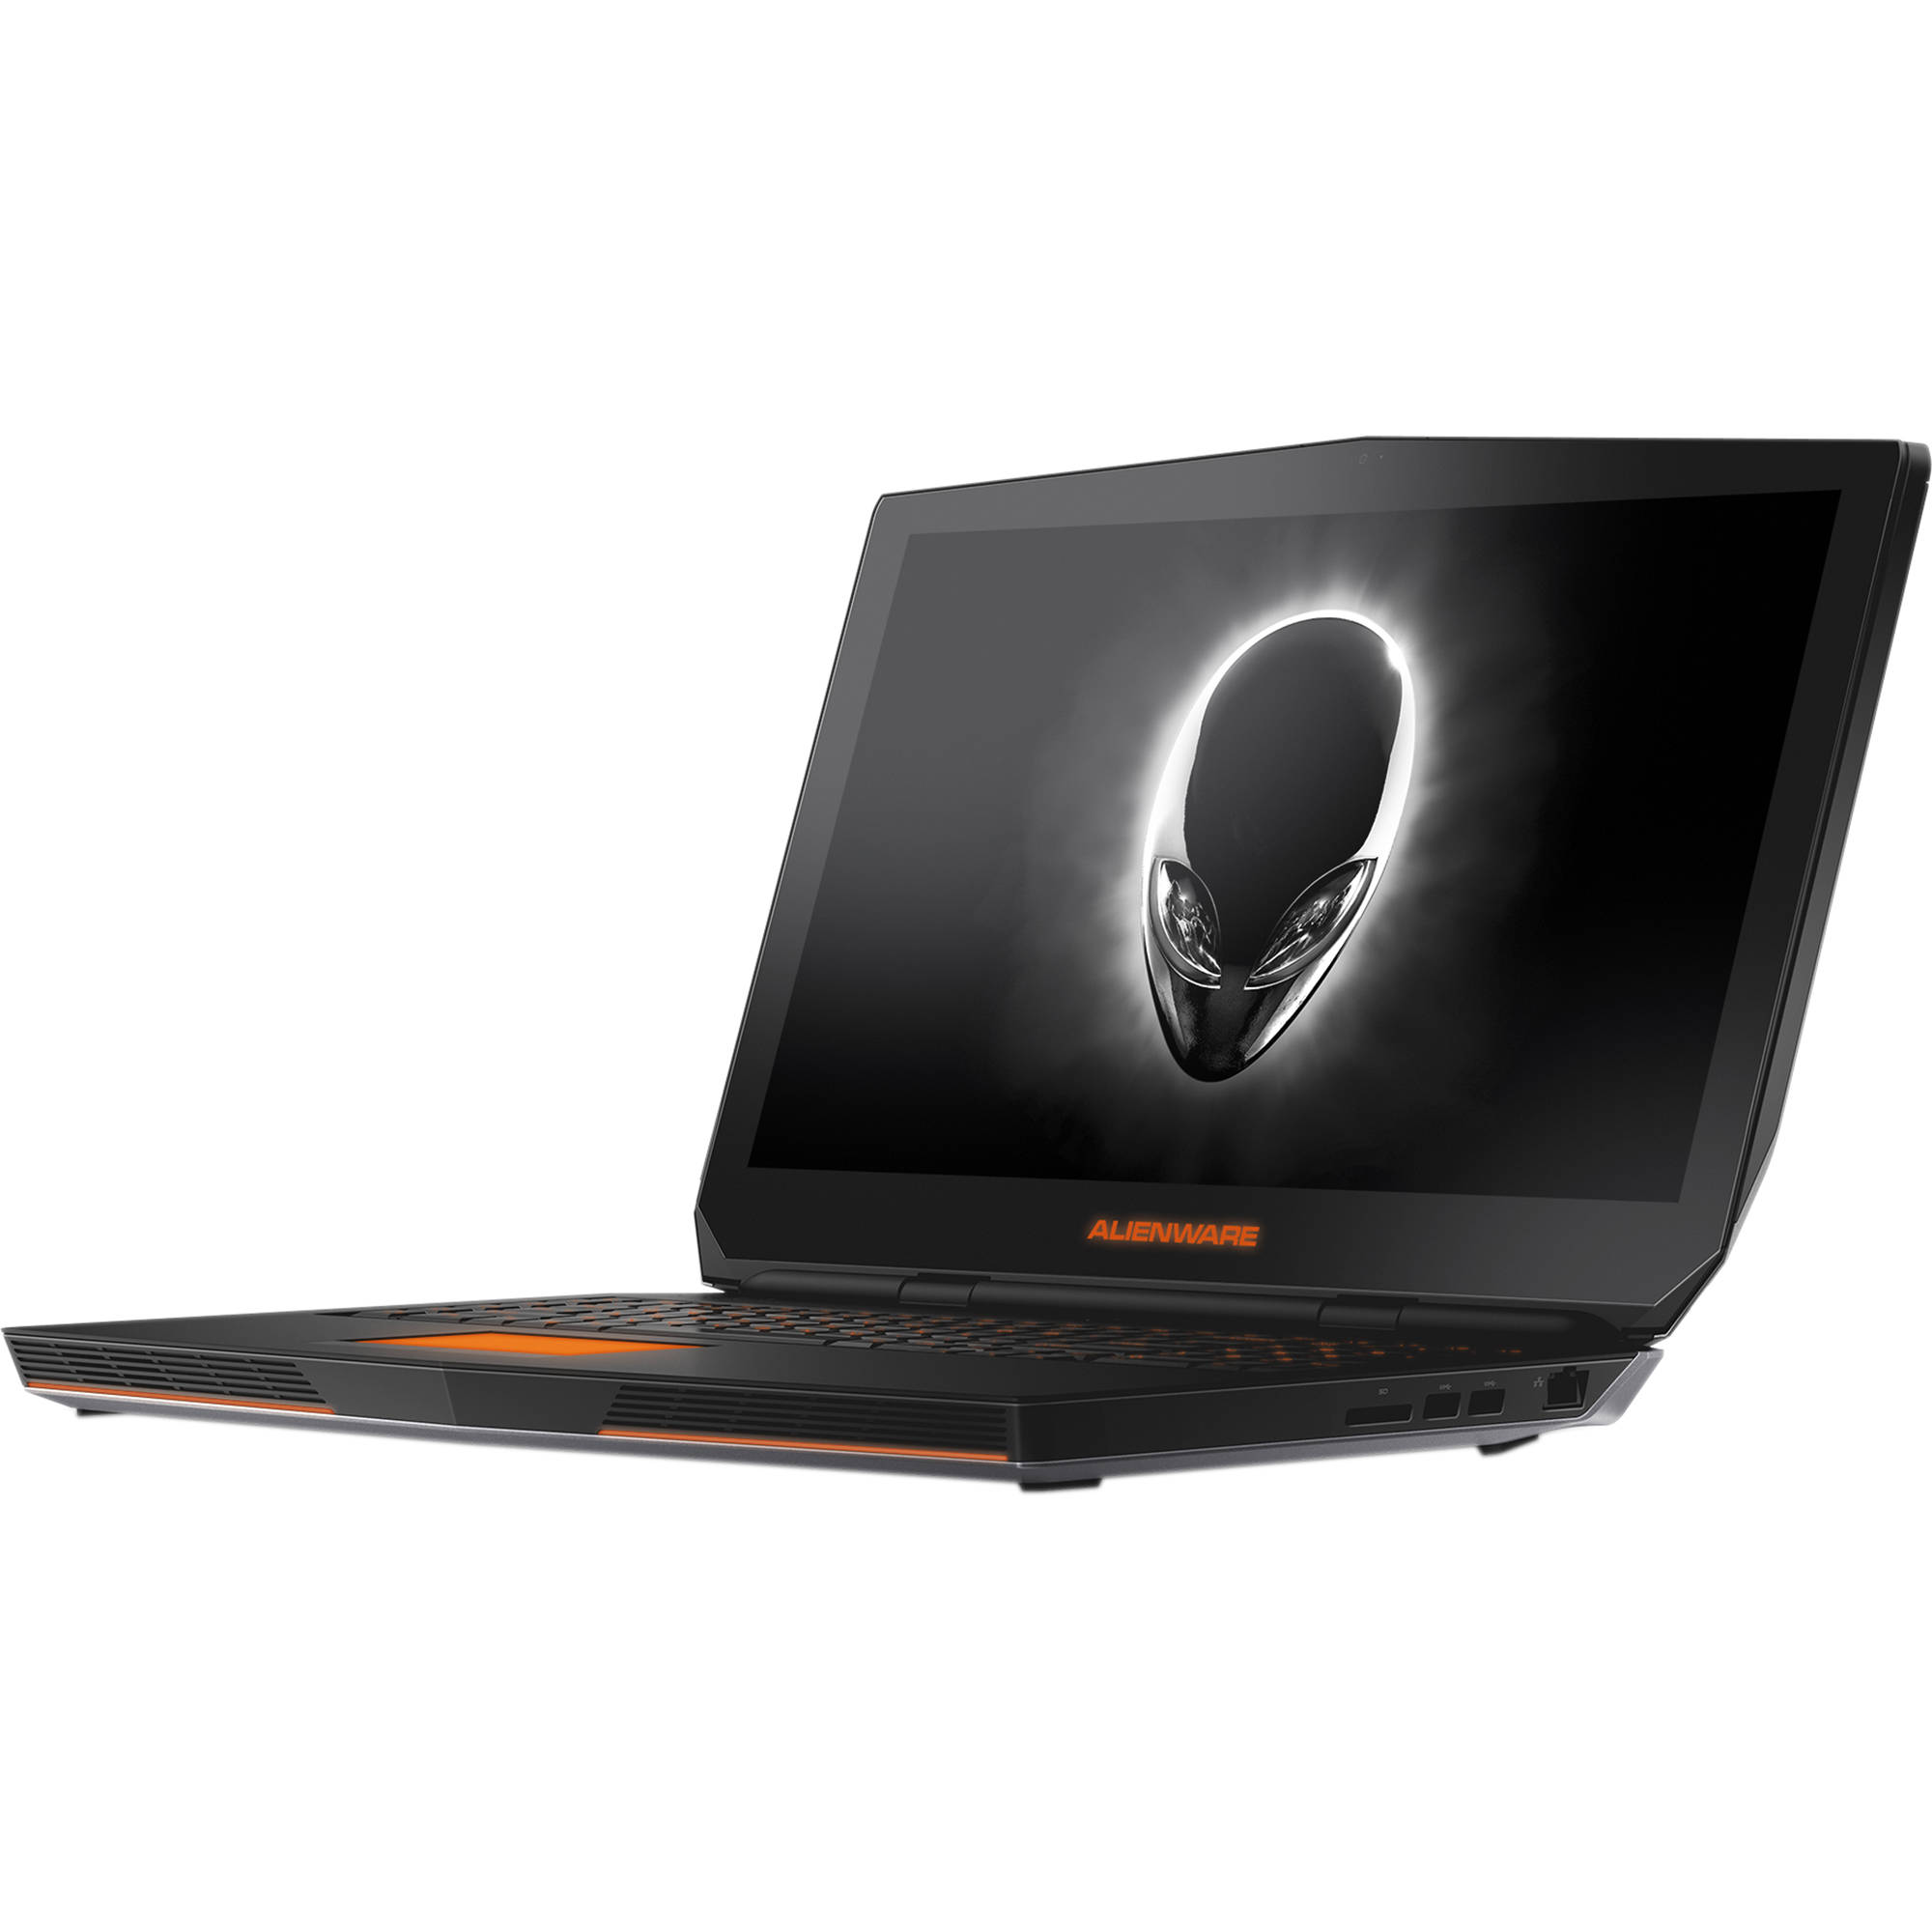 Dell 17 3 Alienware 17 R2 Gaming Laptop Anw17 2143slv